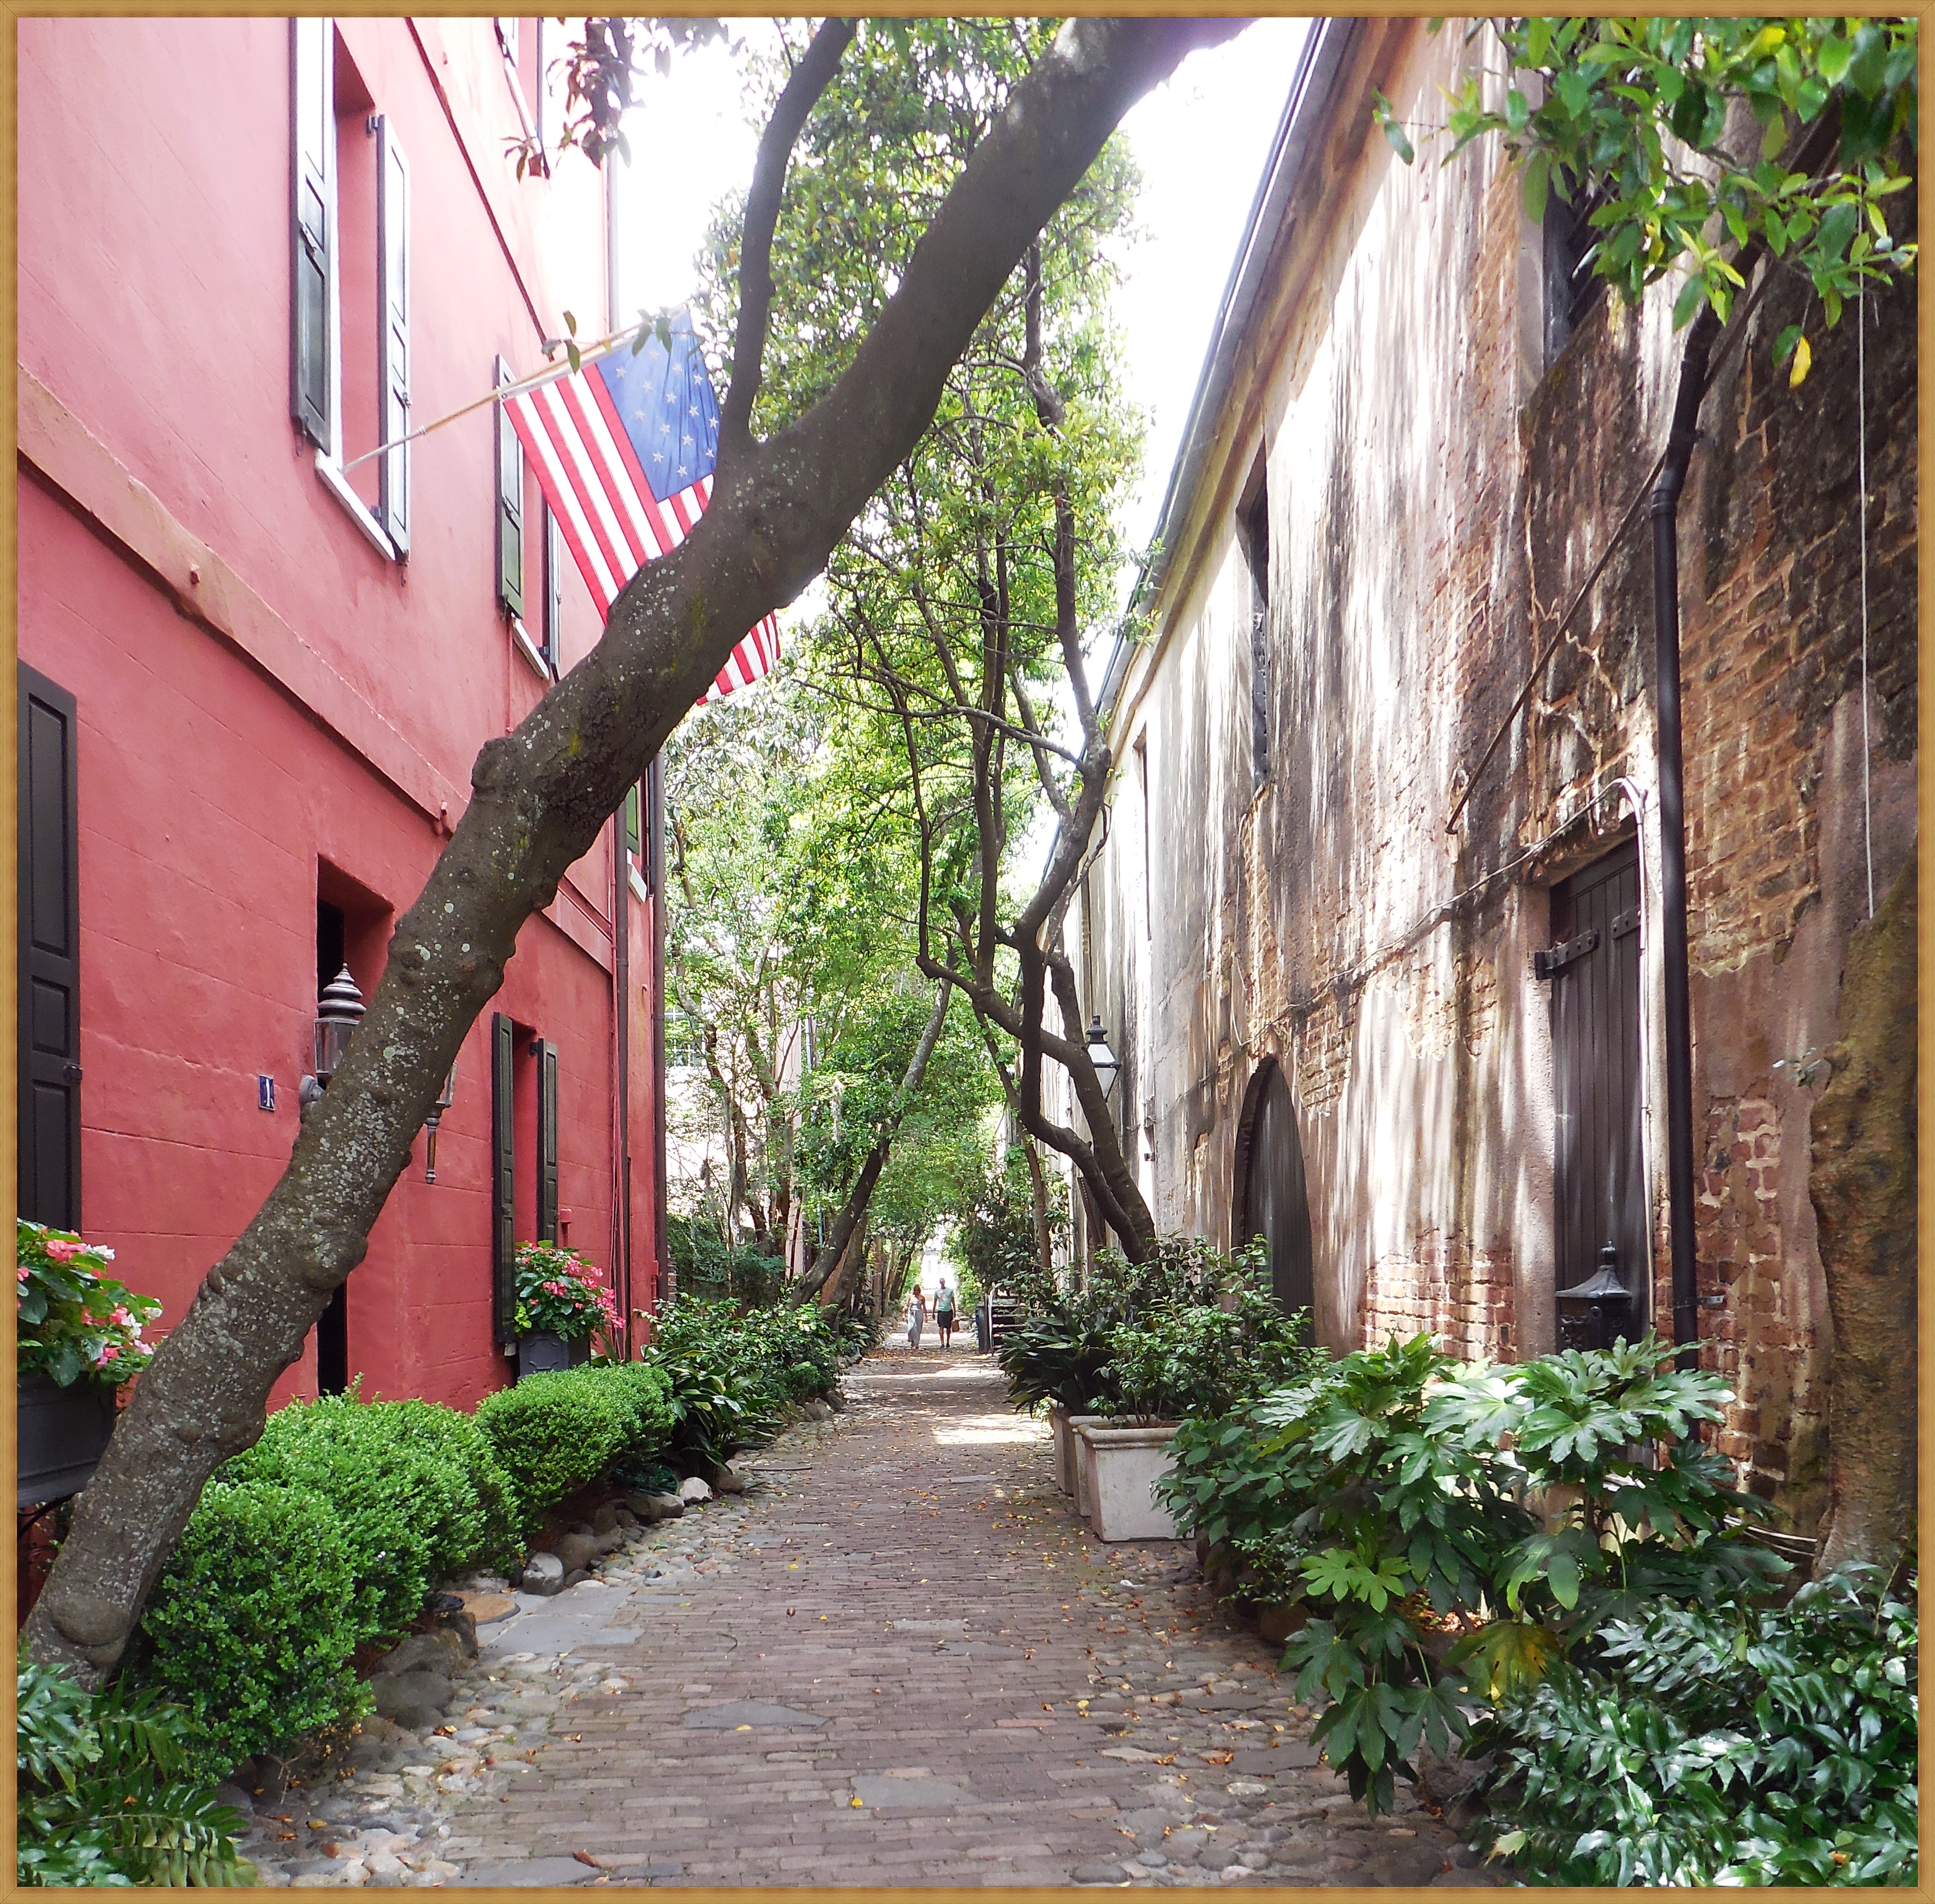 A typical cobbled alleyway in historic Charleston